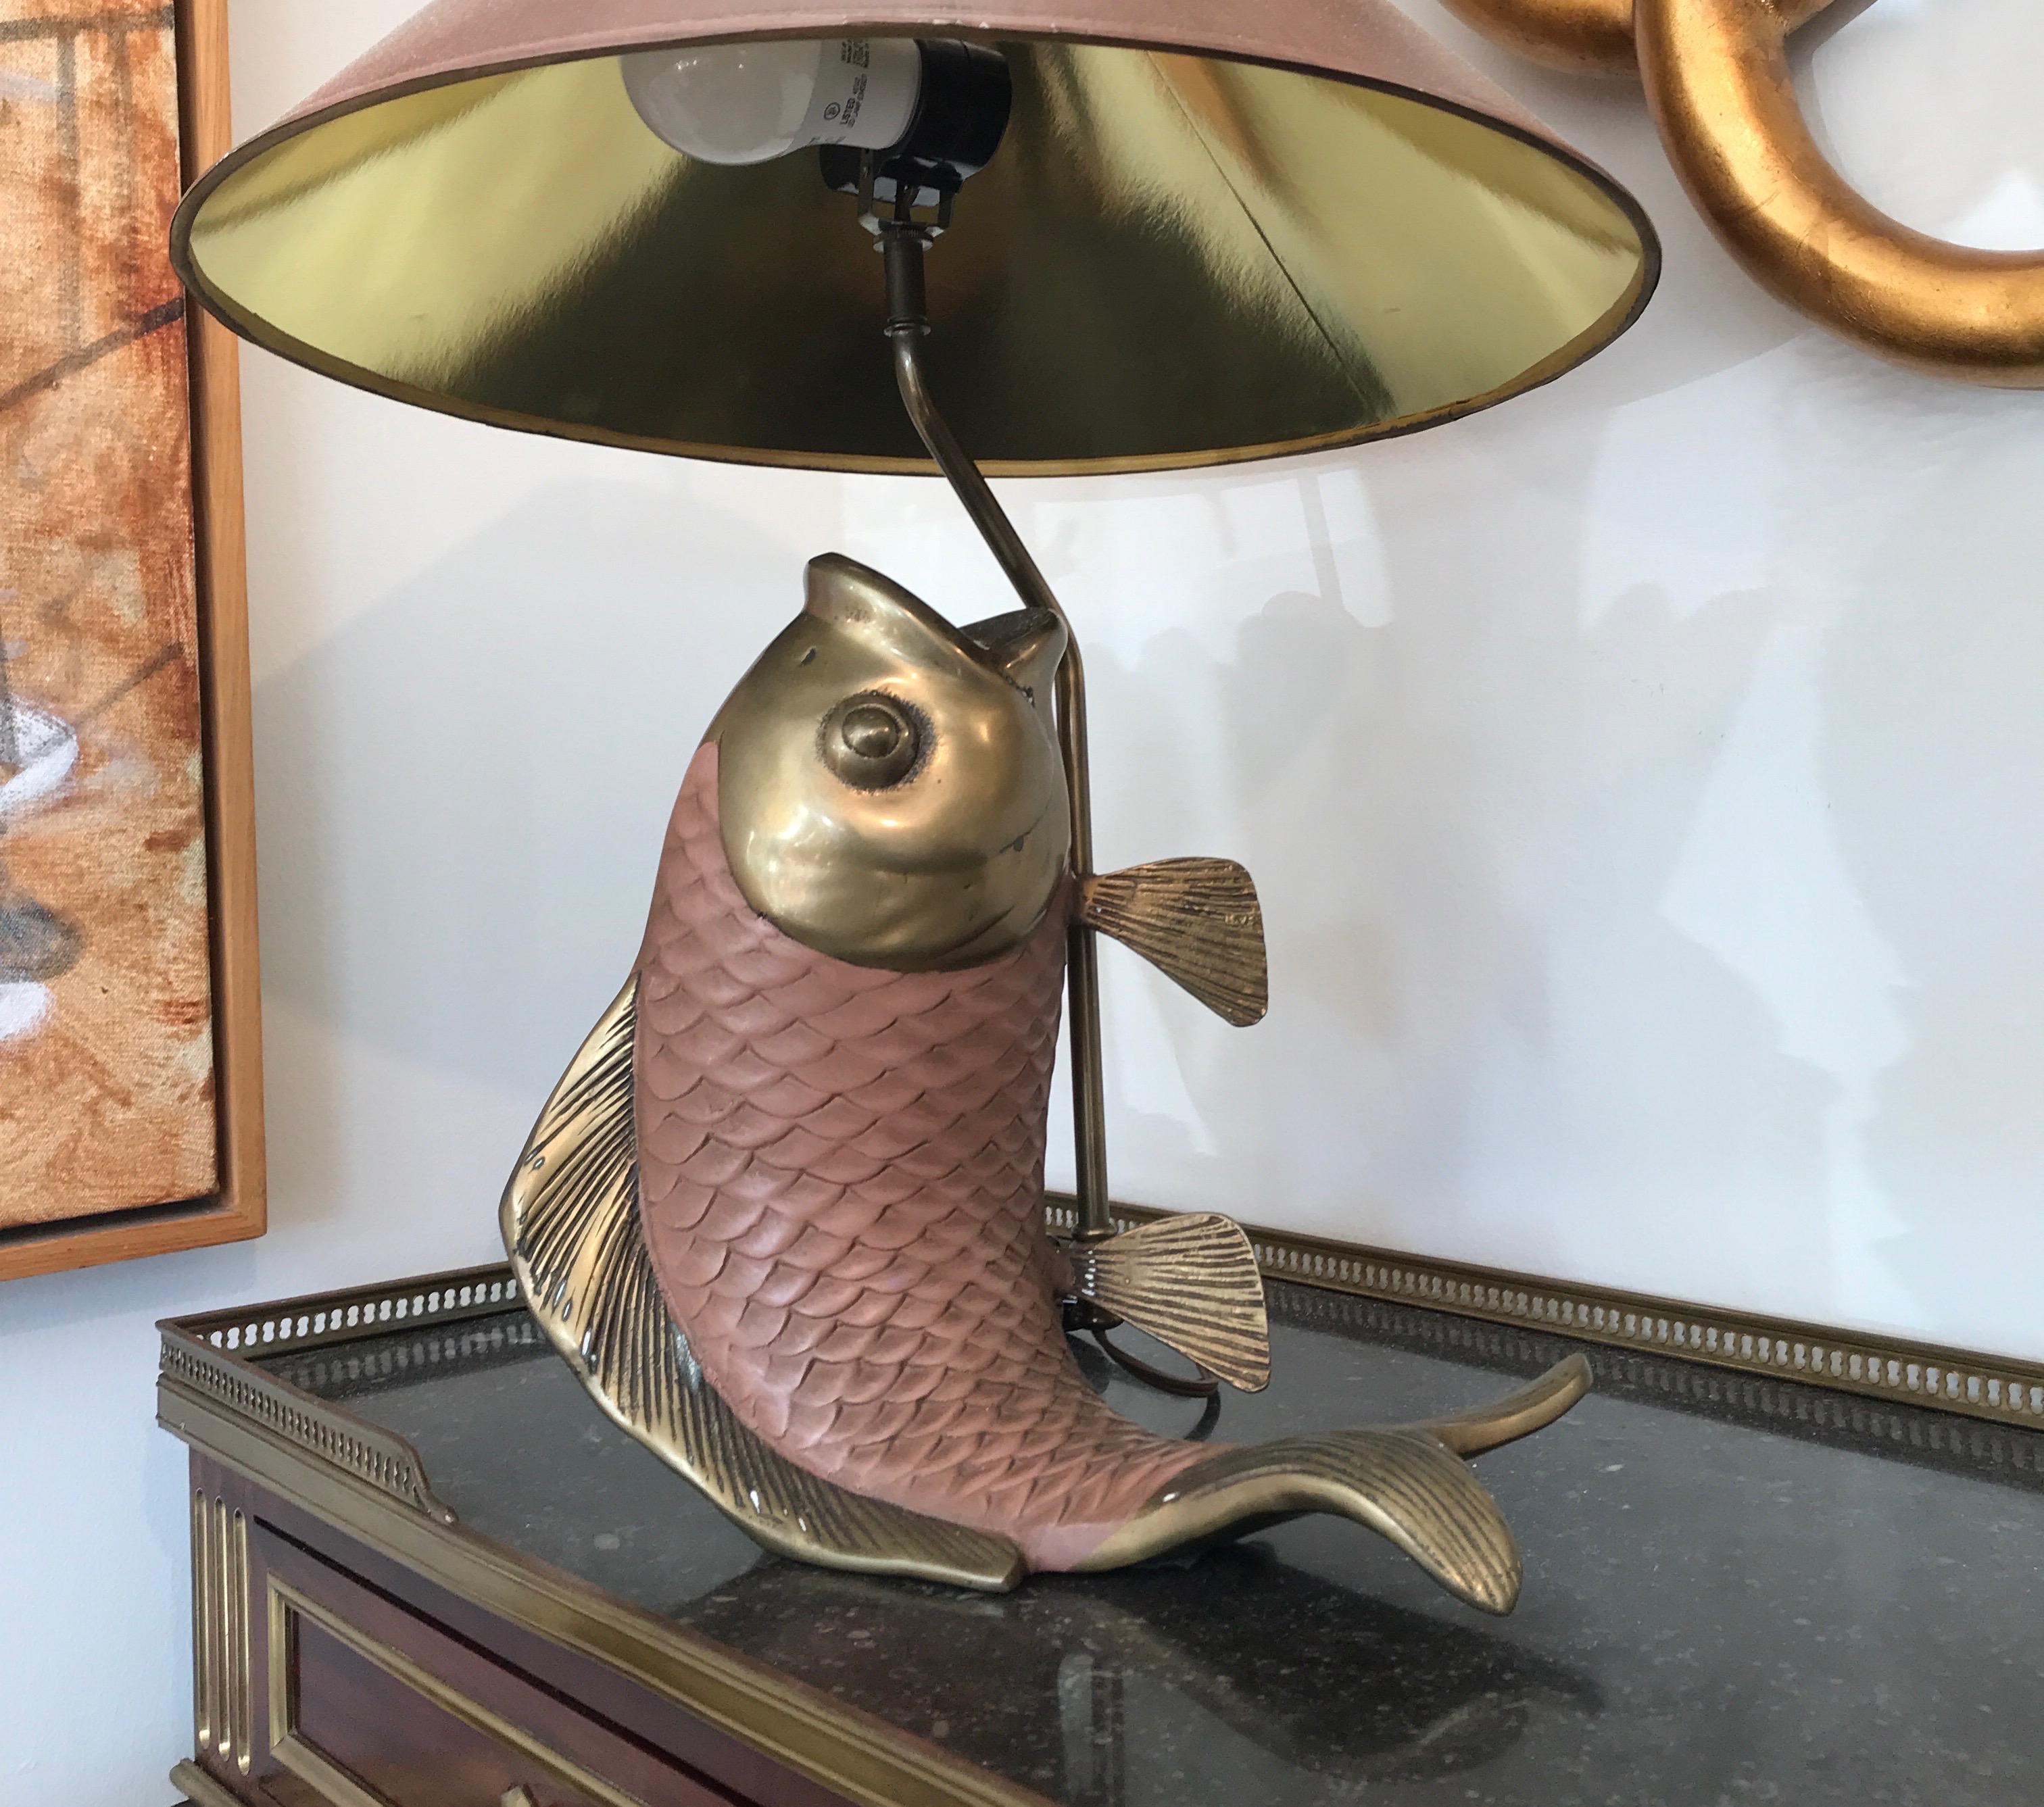 Coy fish table lamp by Chapman.